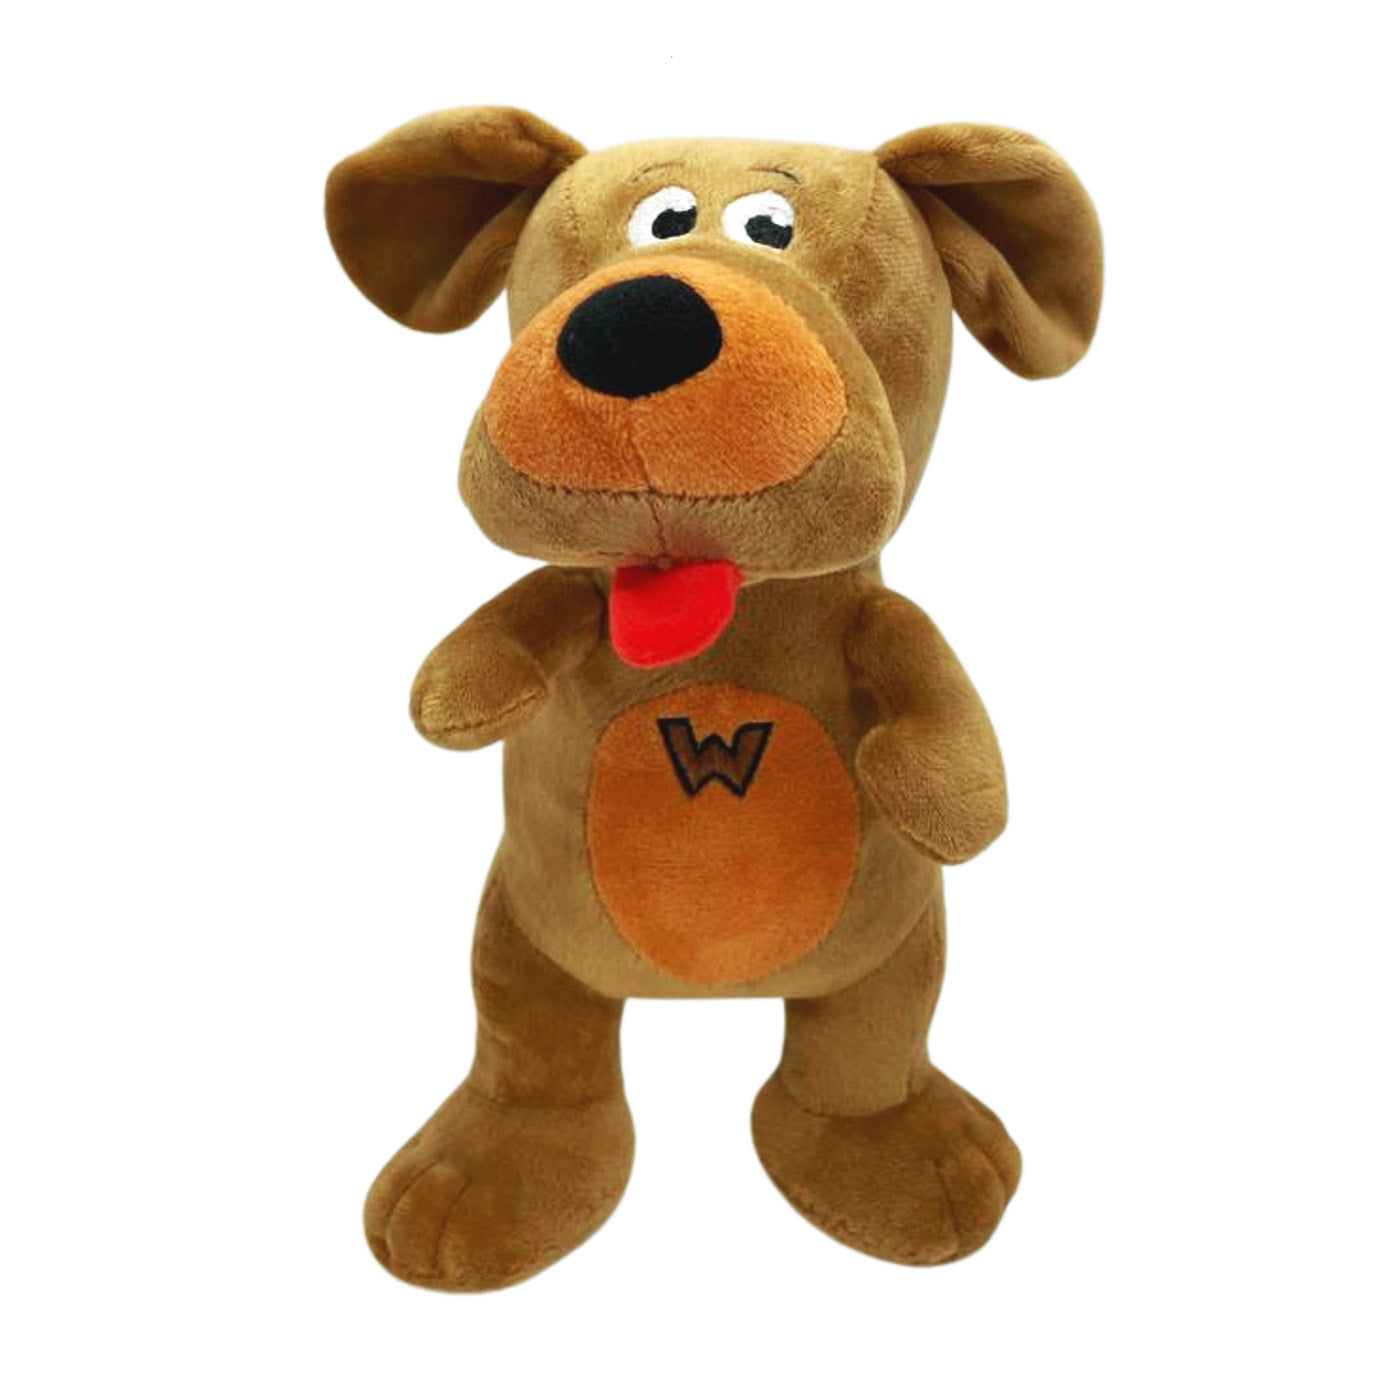 The Wiggles Plush - Wags The Dog